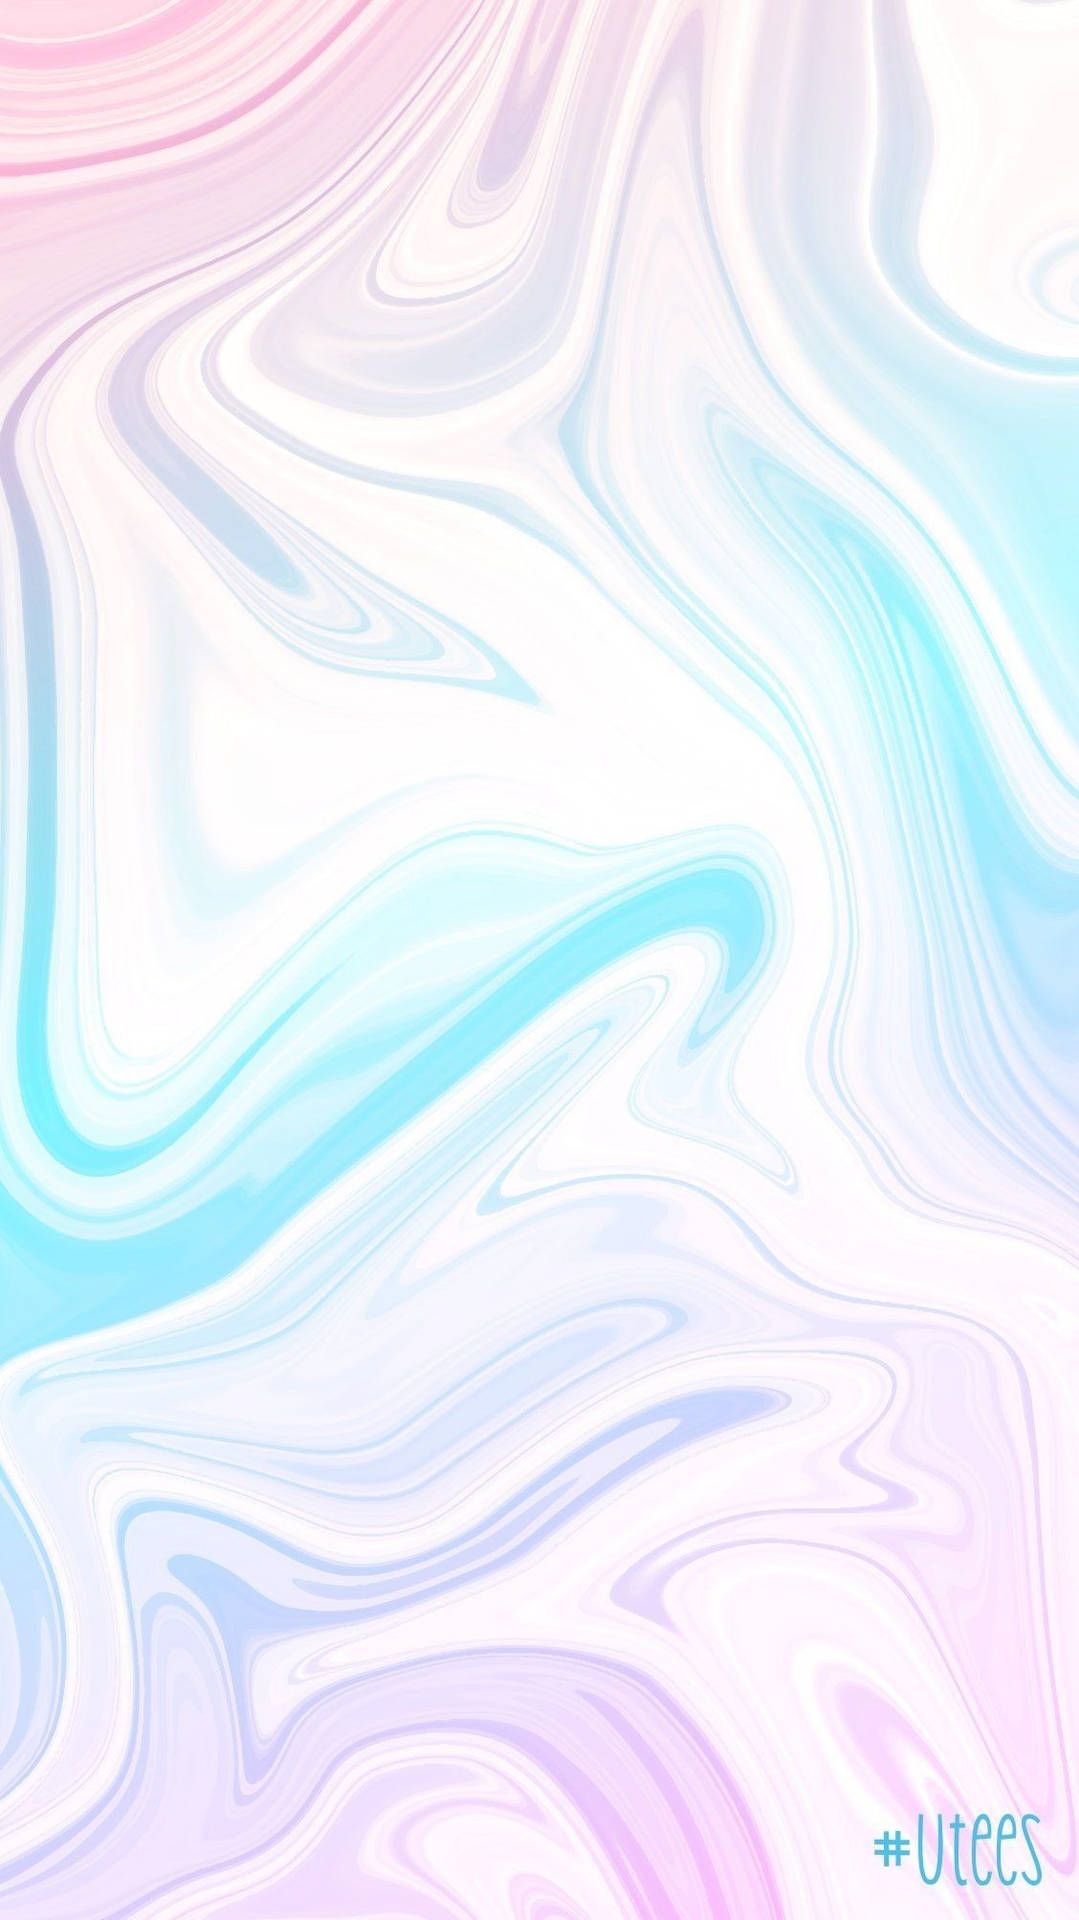 Aesthetic Marble Wallpaper Full HD, 4K Free to Use